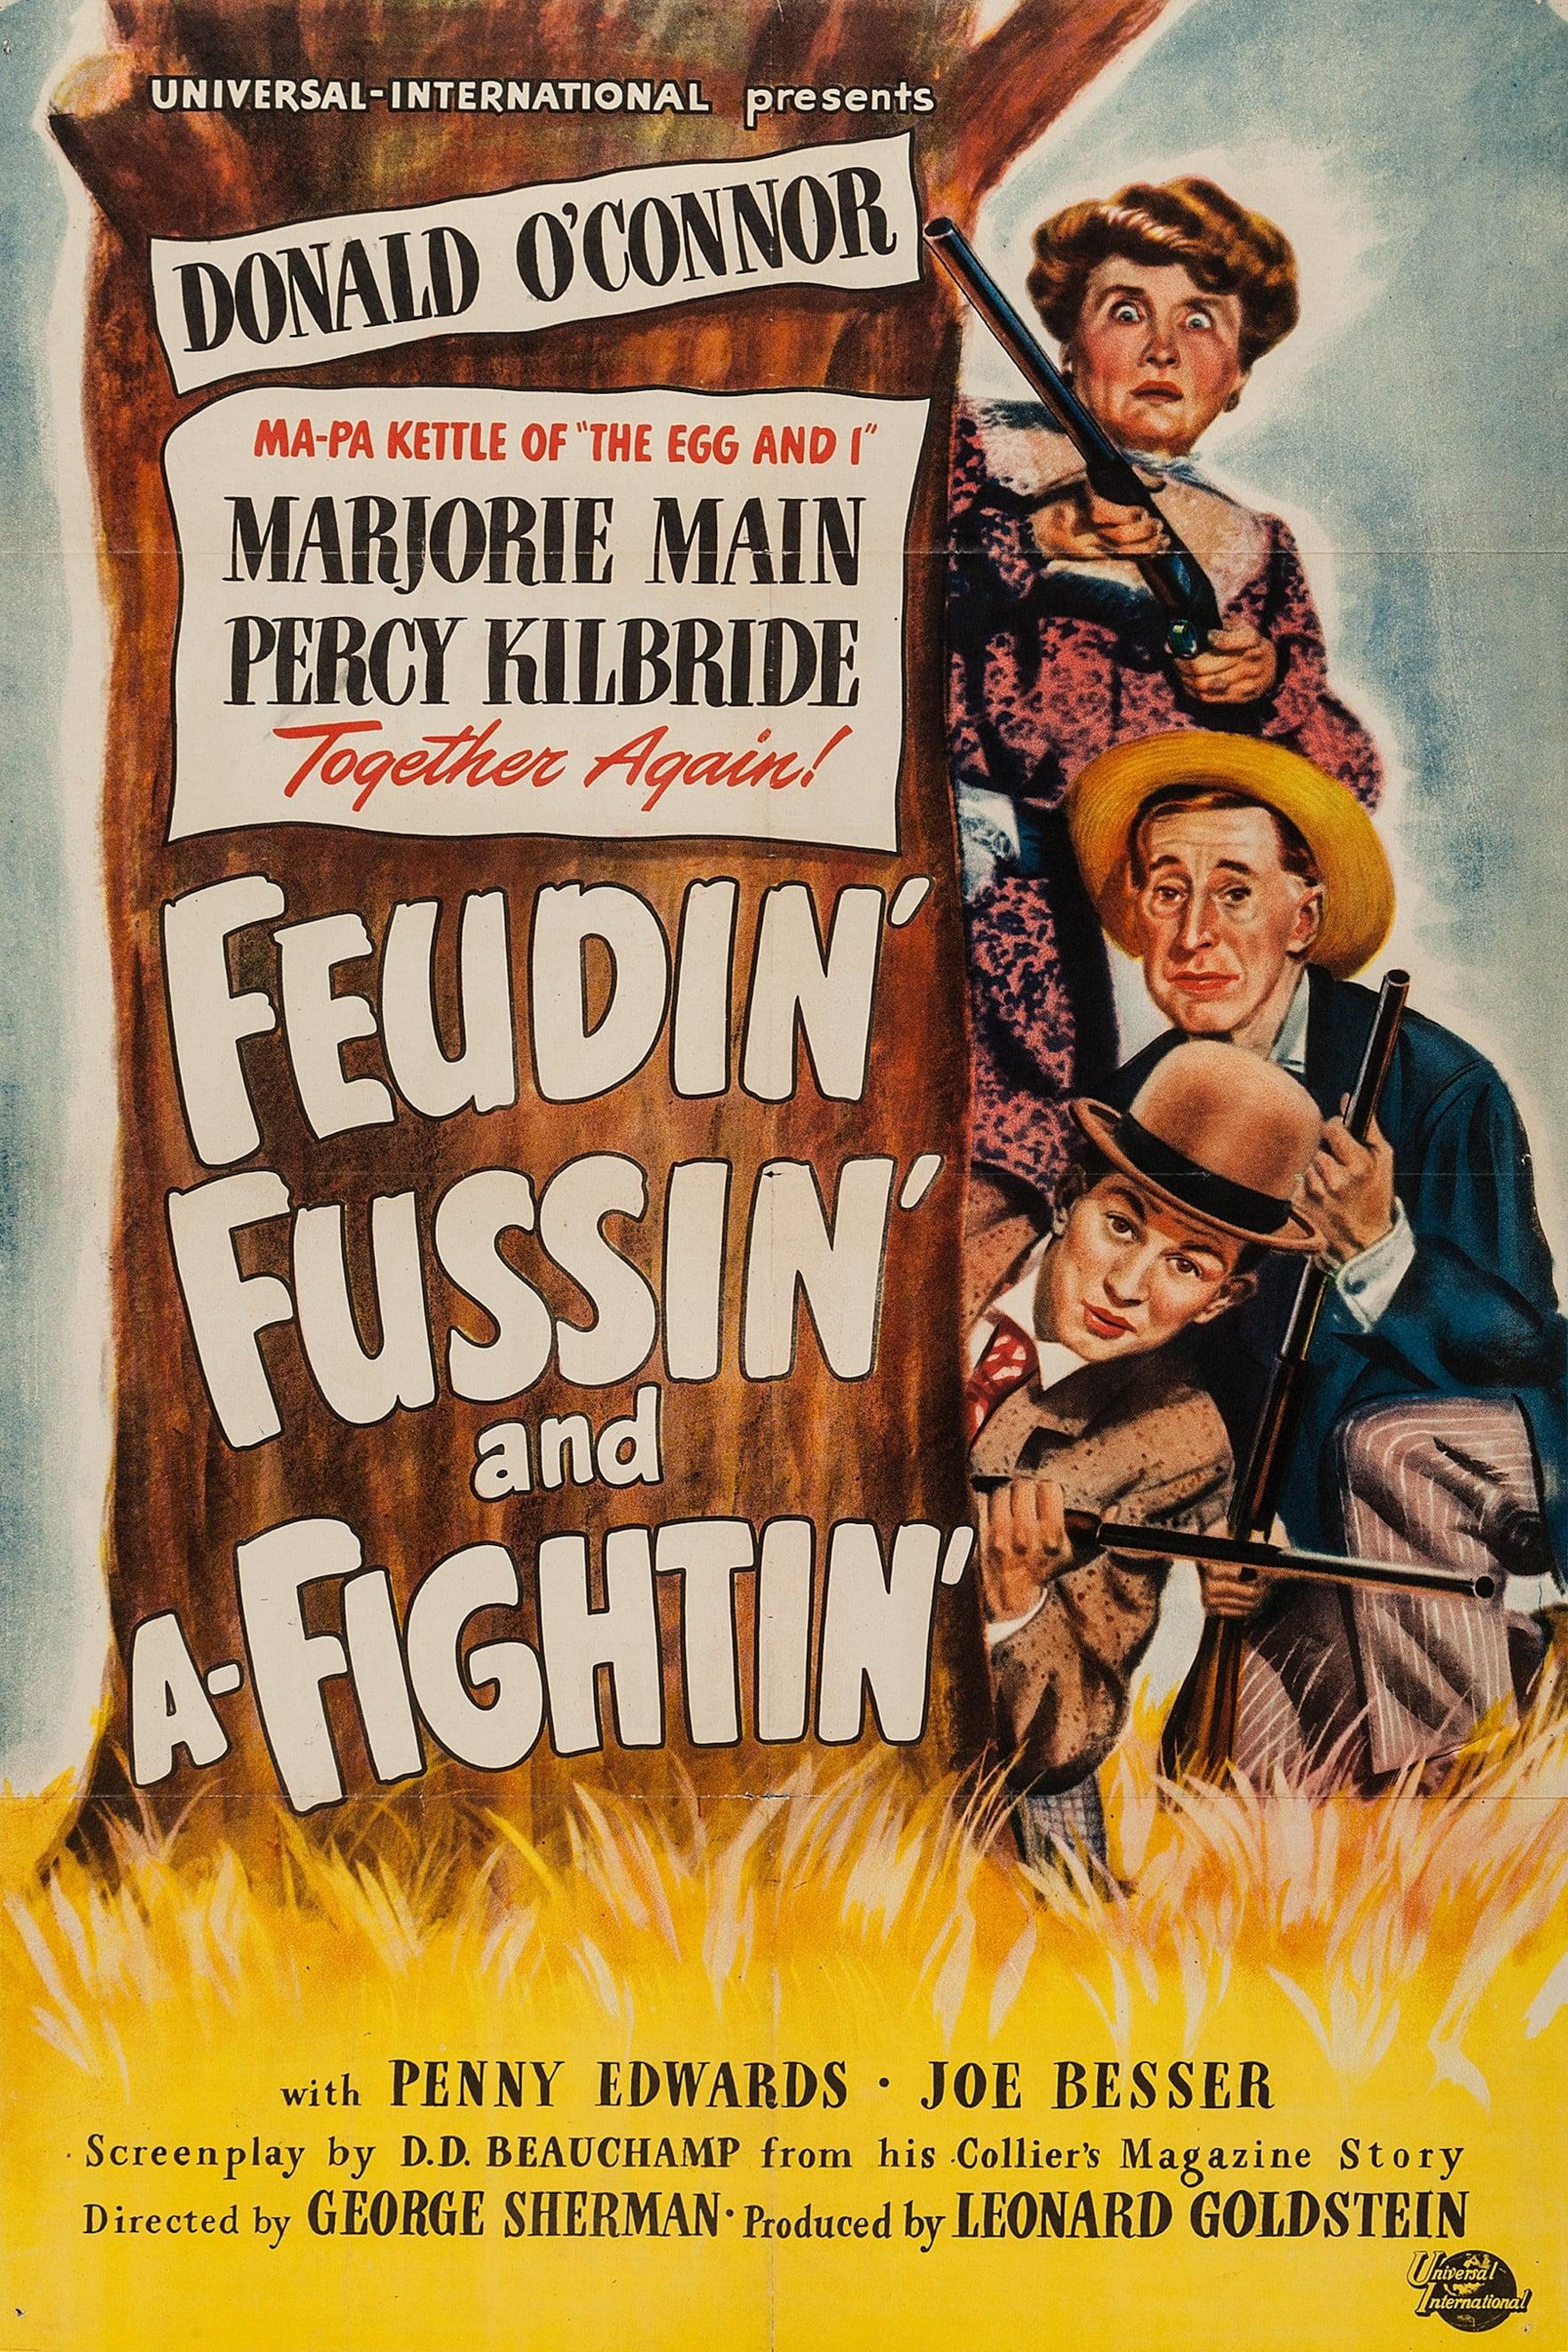 Feudin', Fussin' and A-Fightin' poster